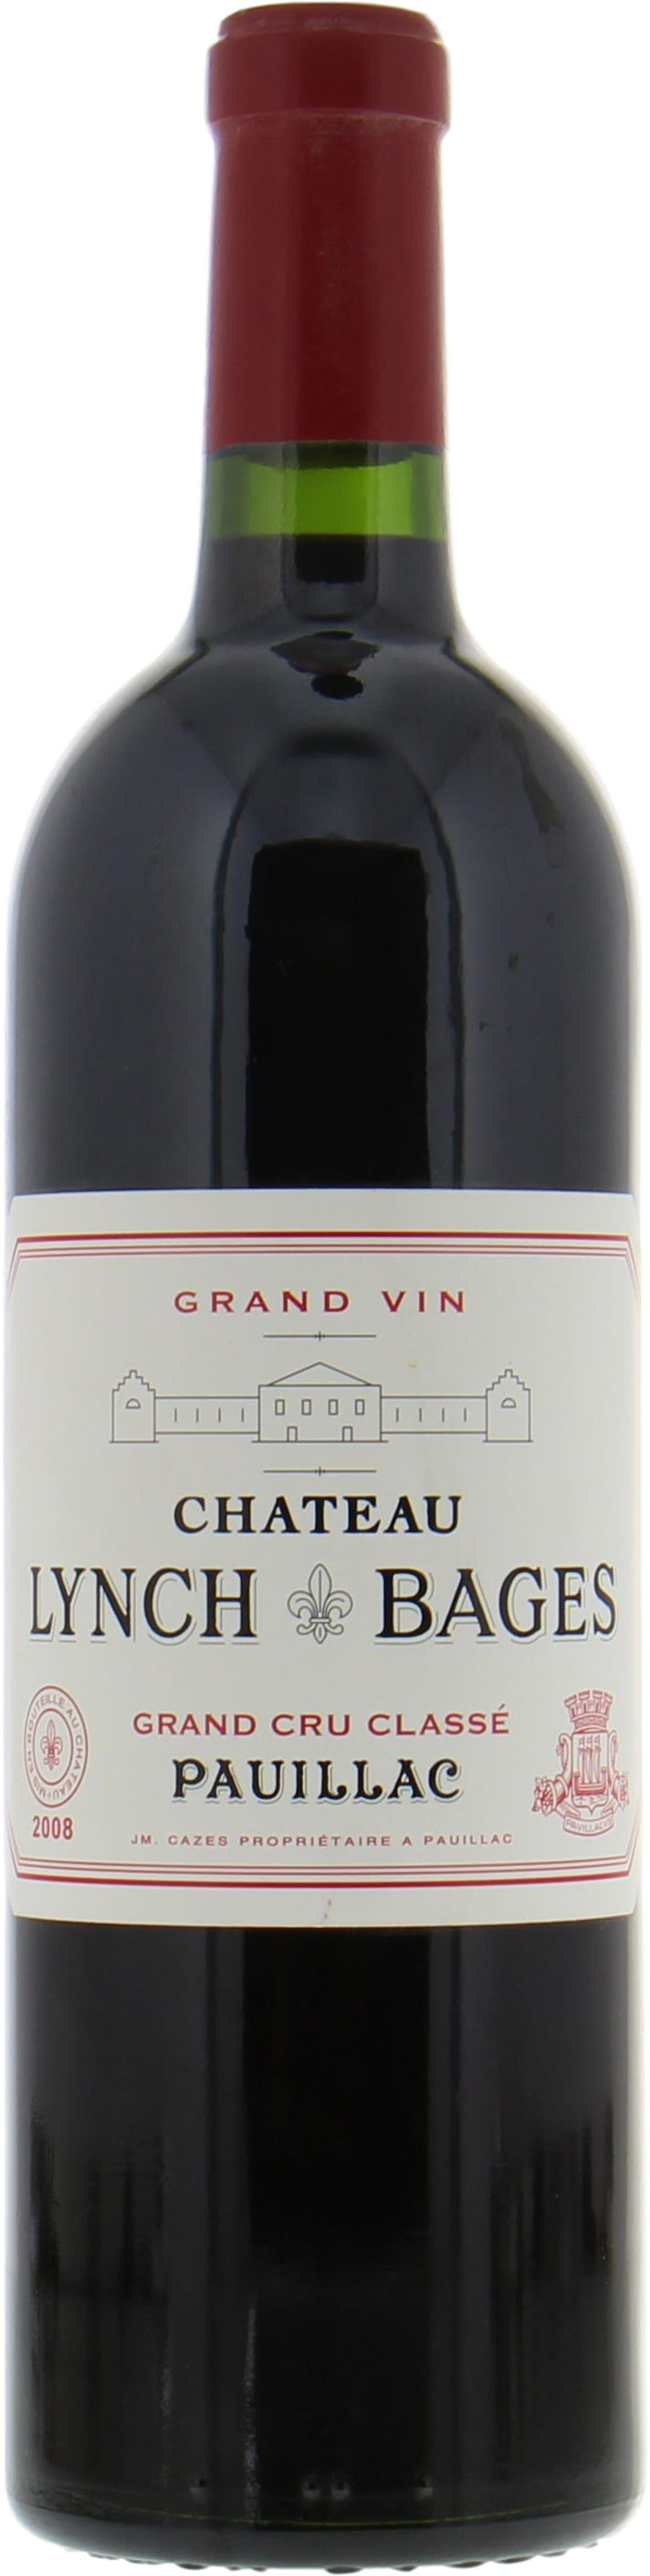 Chateau Lynch Bages - Chateau Lynch Bages 2008